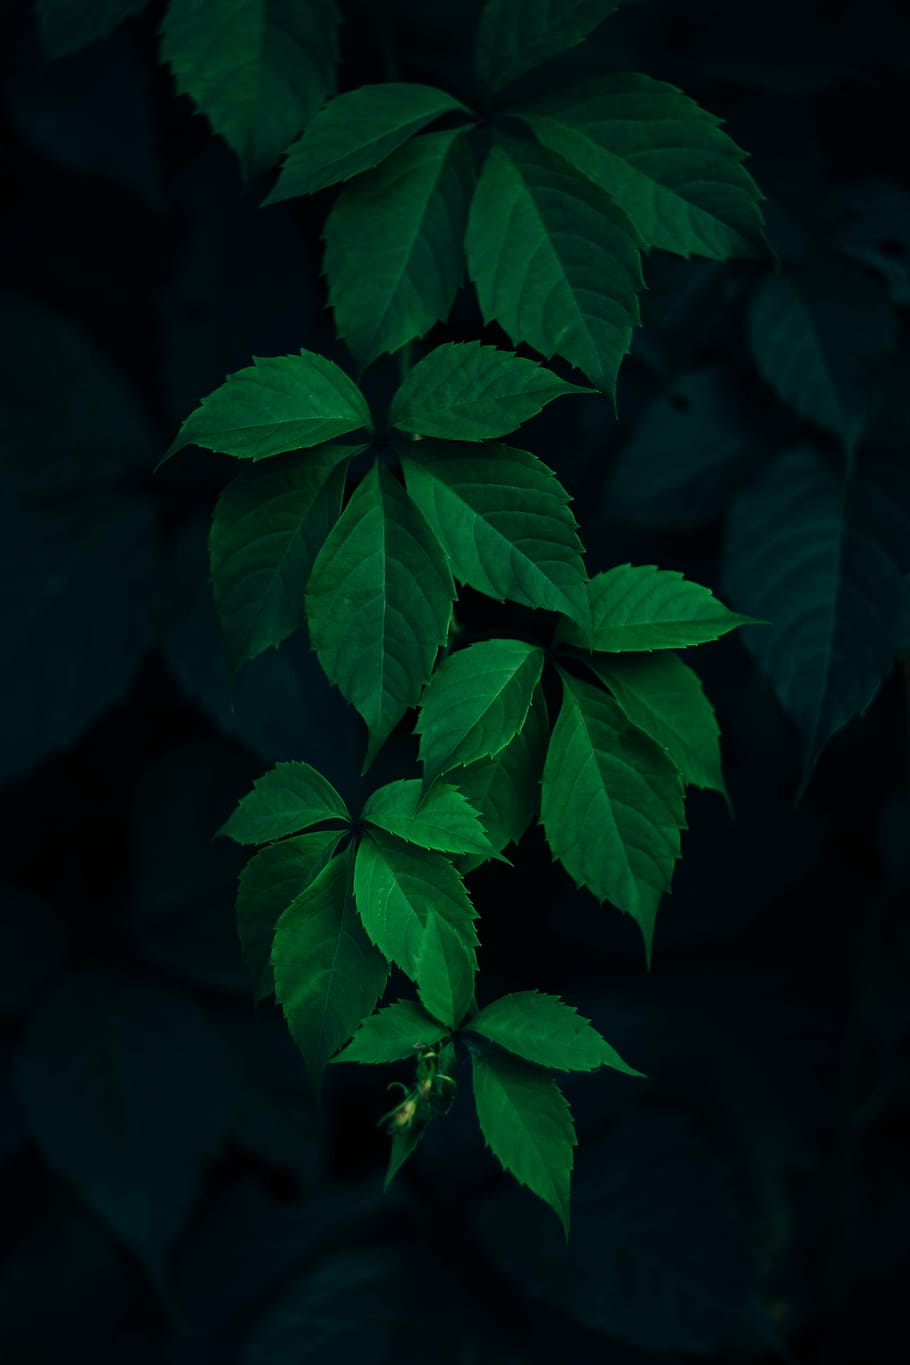 HD wallpaper: ovate green leafed plant, dark, blur, nature, green color,  growth | Wallpaper Flare